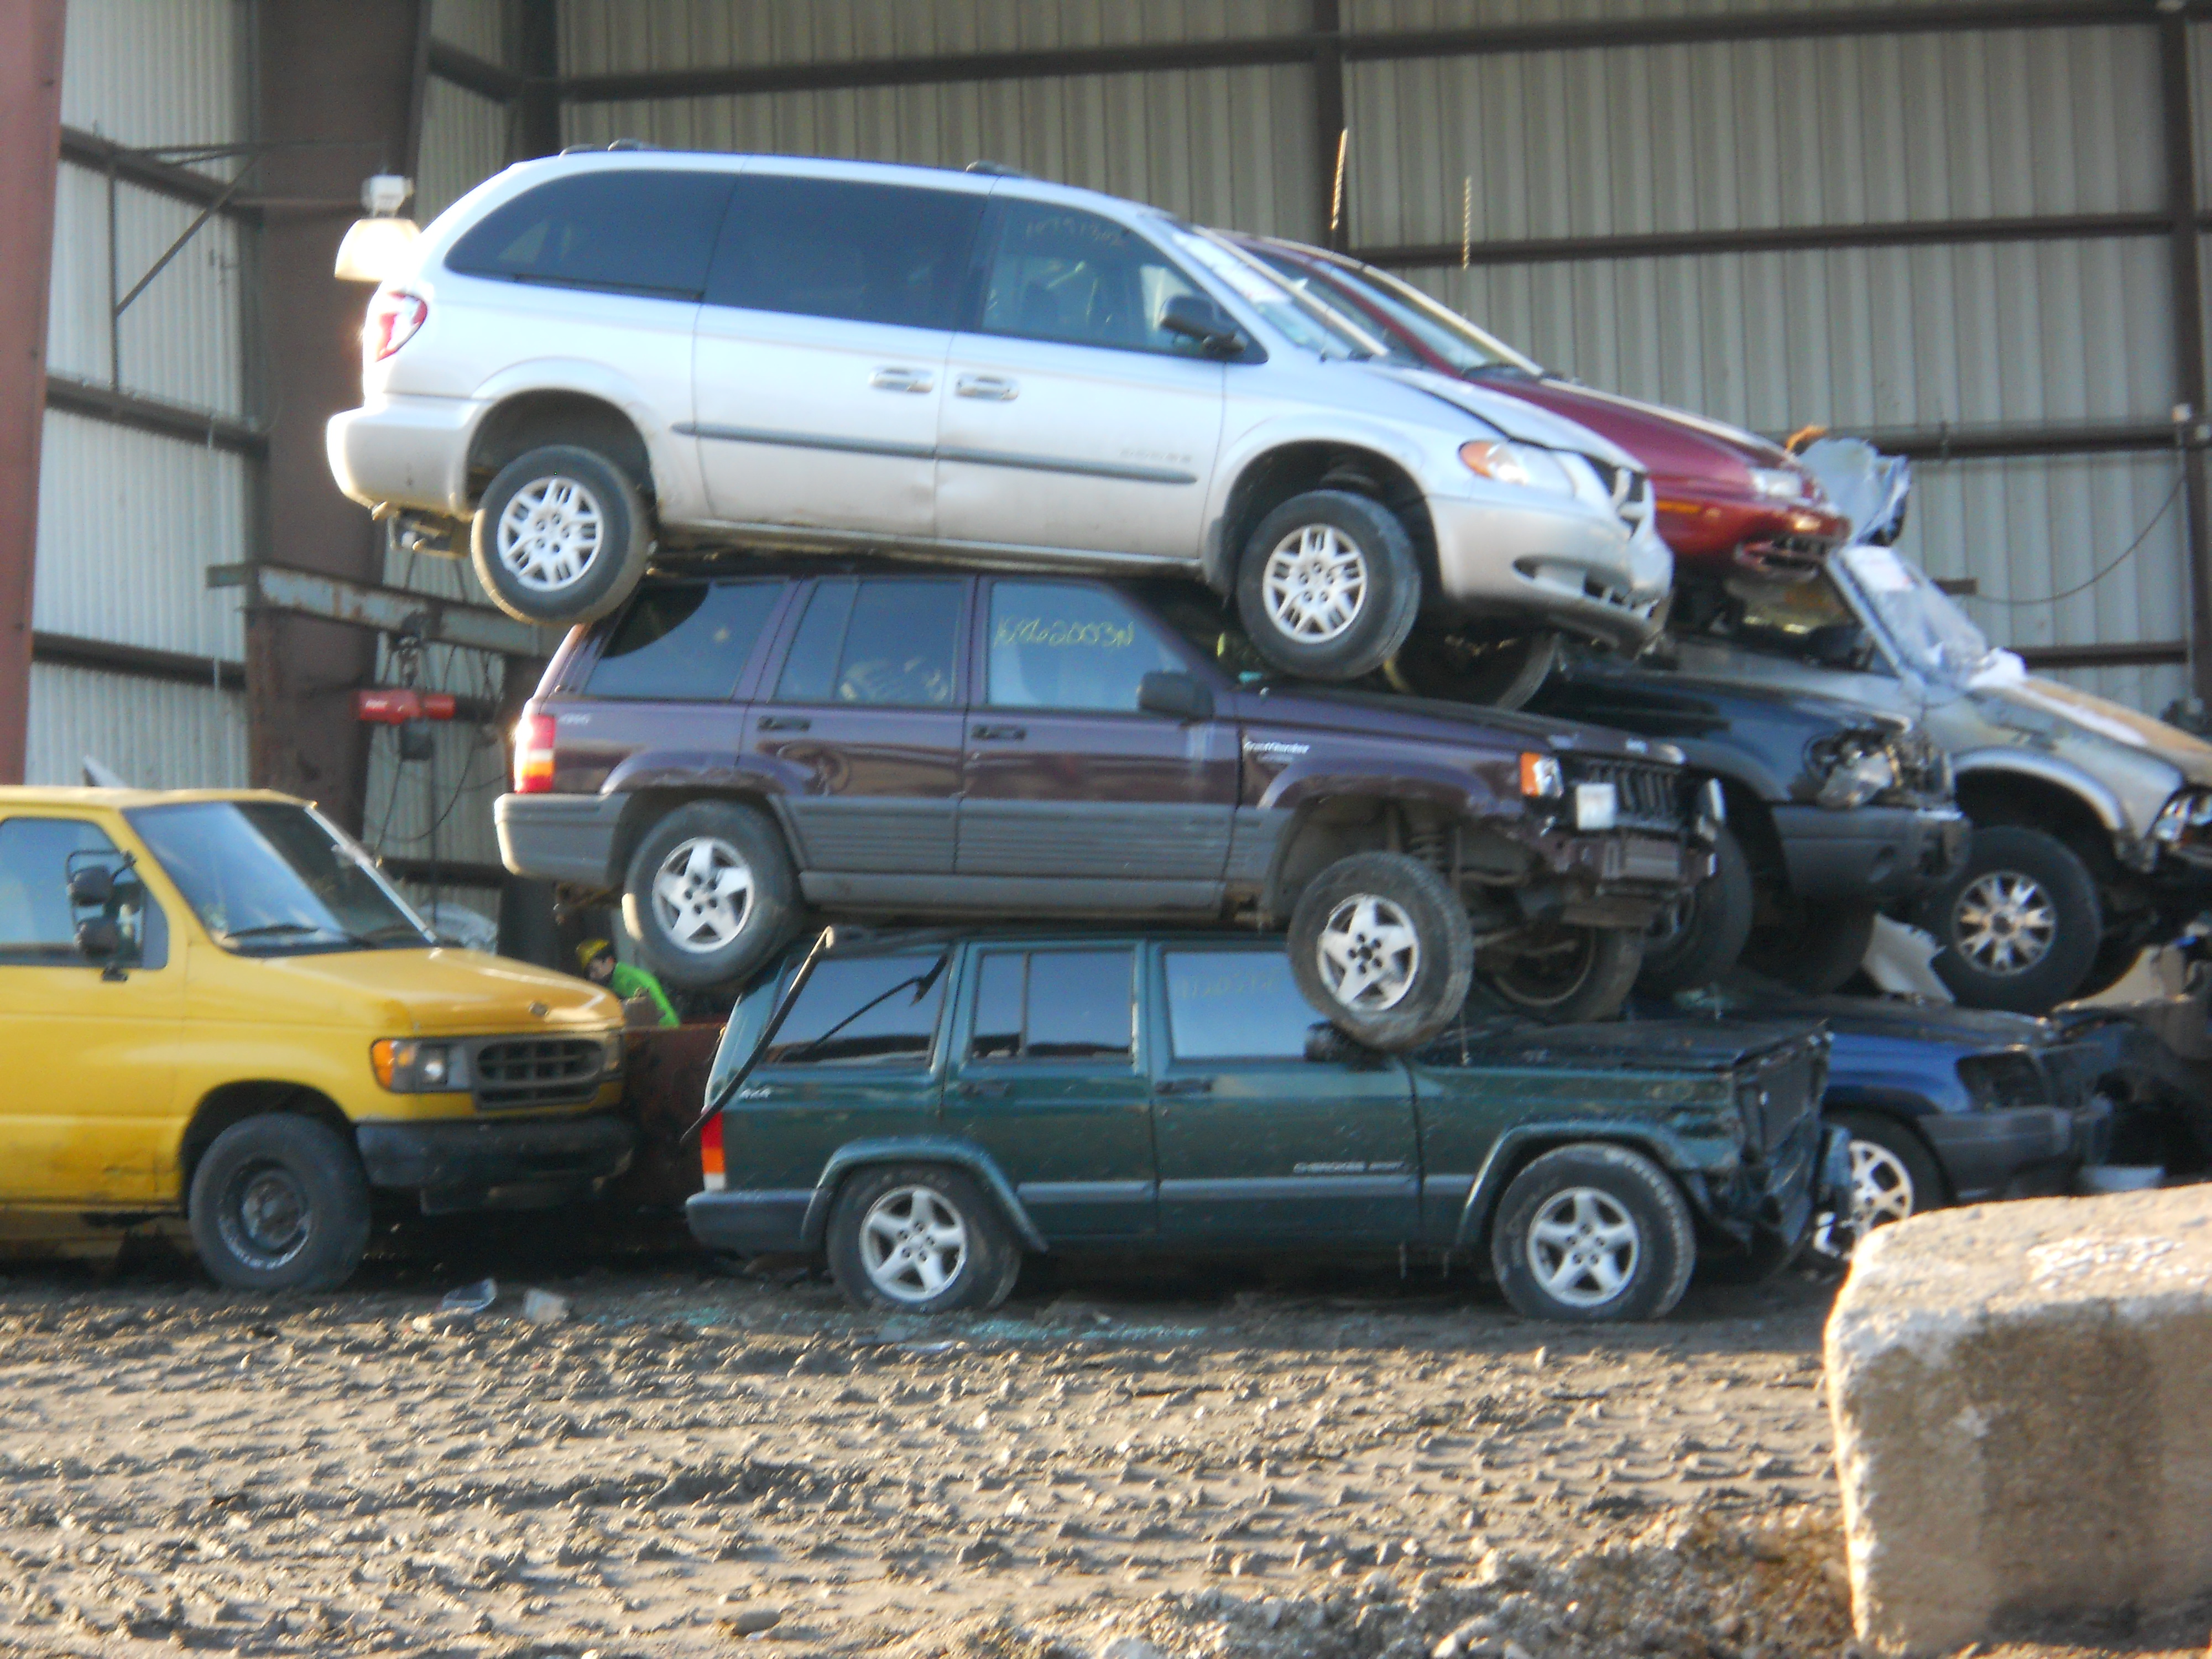 Poll: How Much Do You Earn From Buy Junk Cars Denver No Title?